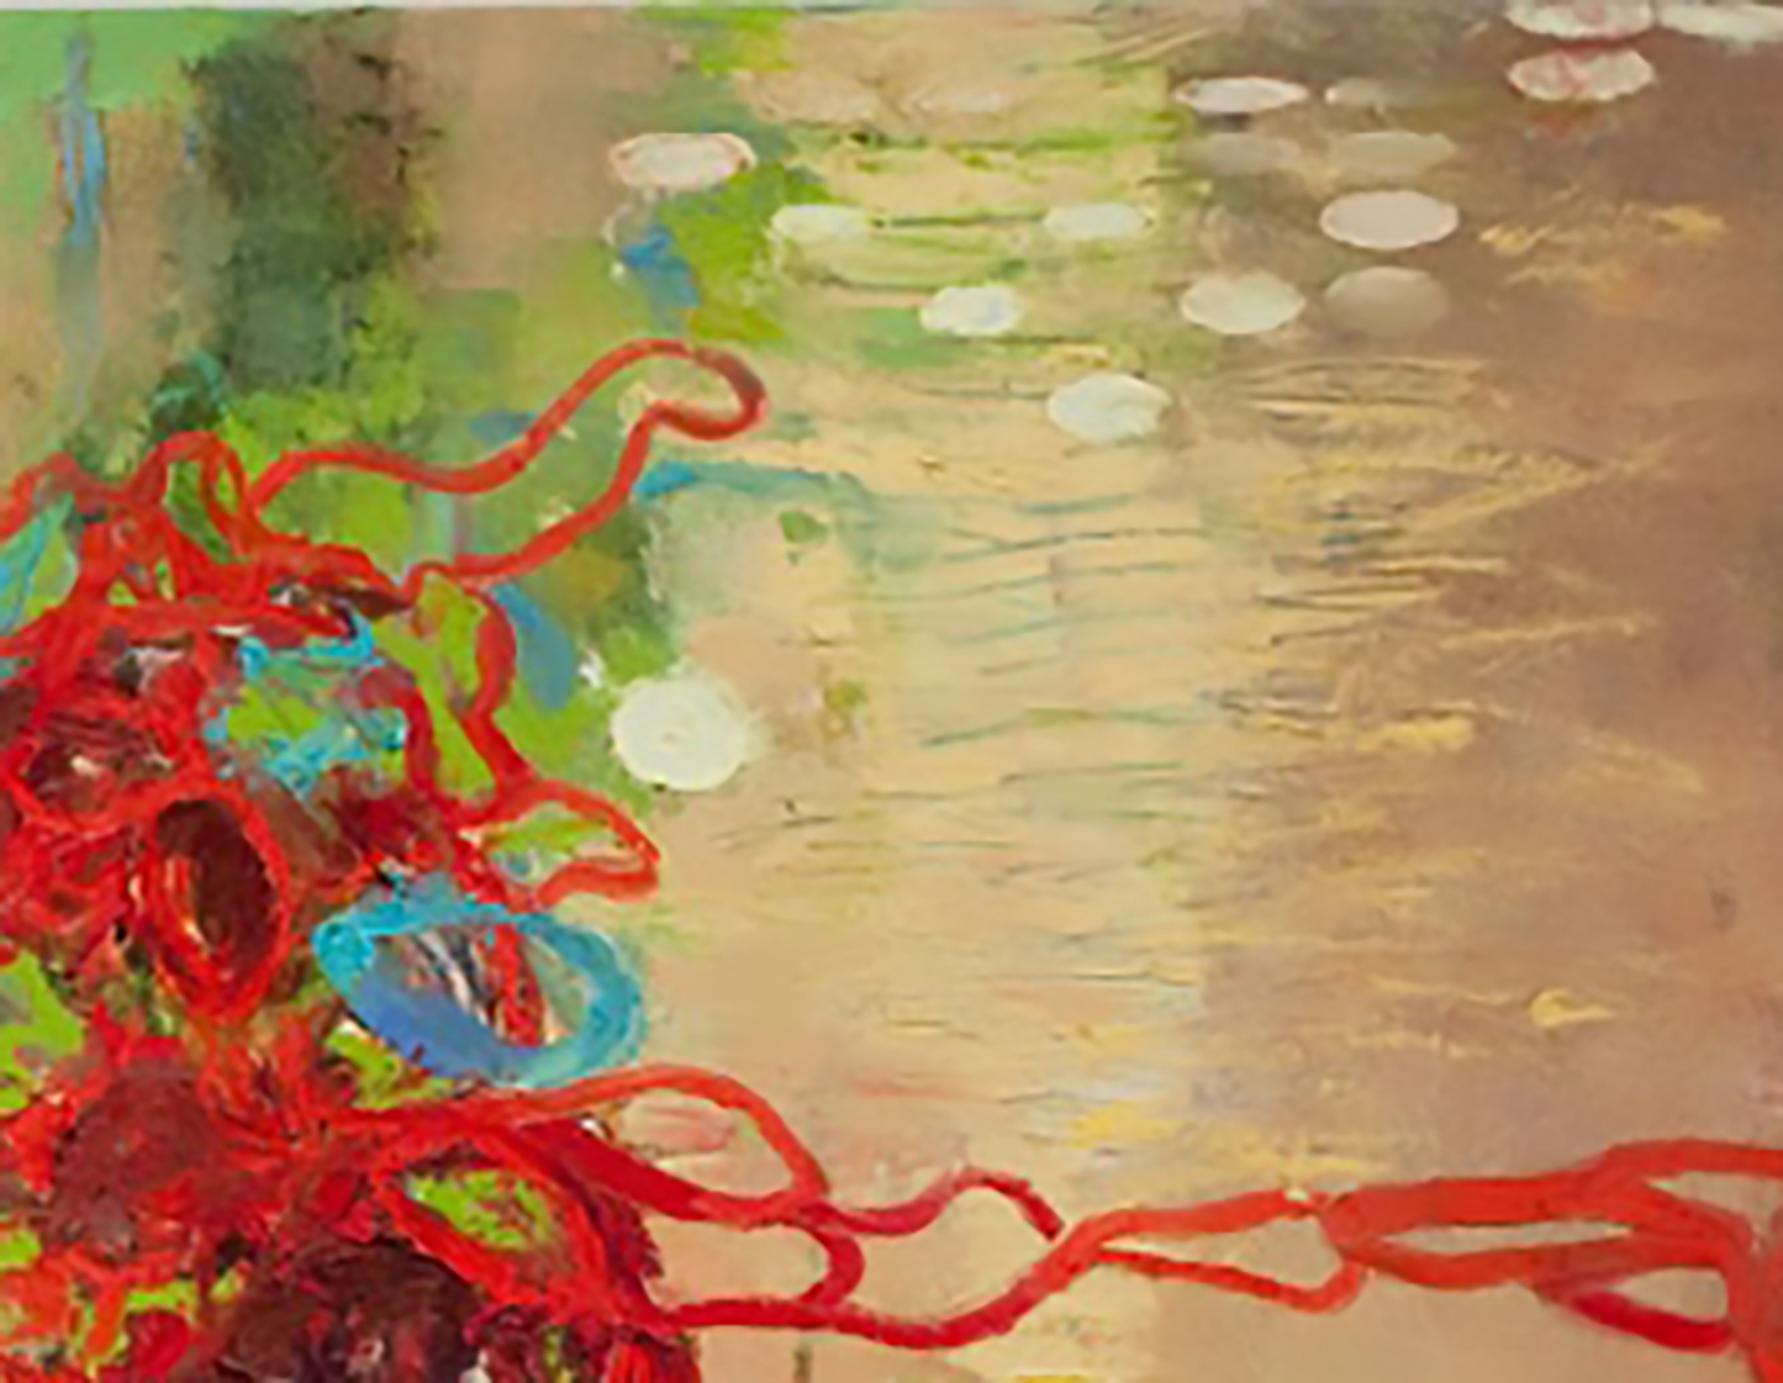 The Journey - Painting by Lisa Pressman